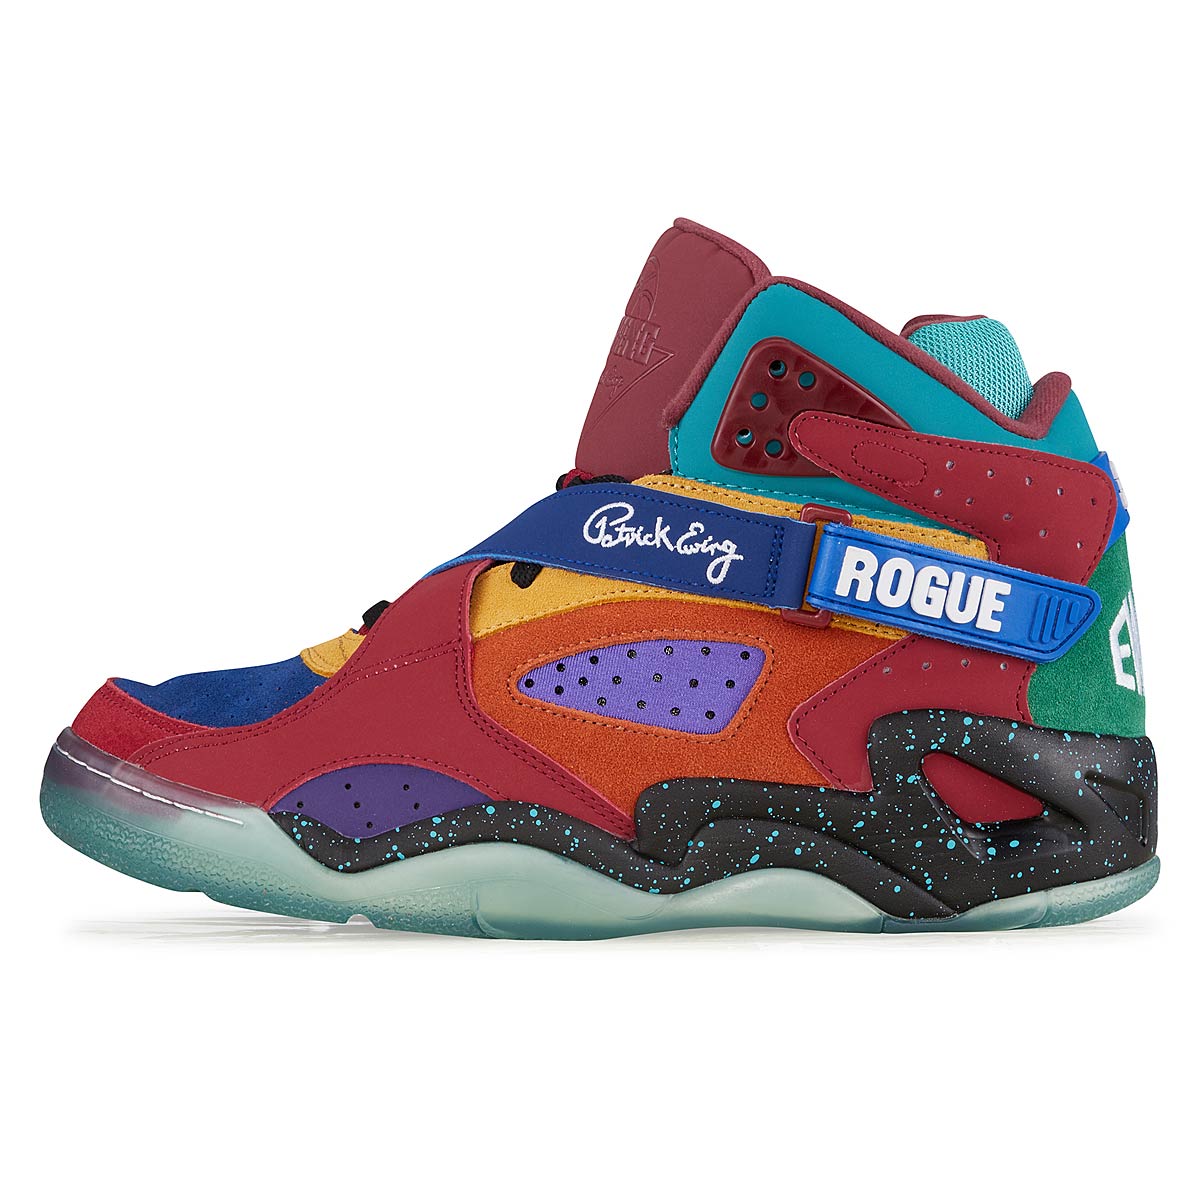 Image of Ewing Athletics Rogue Remix, Colored, size: 9, Male, Trainers, 1BM00244-026